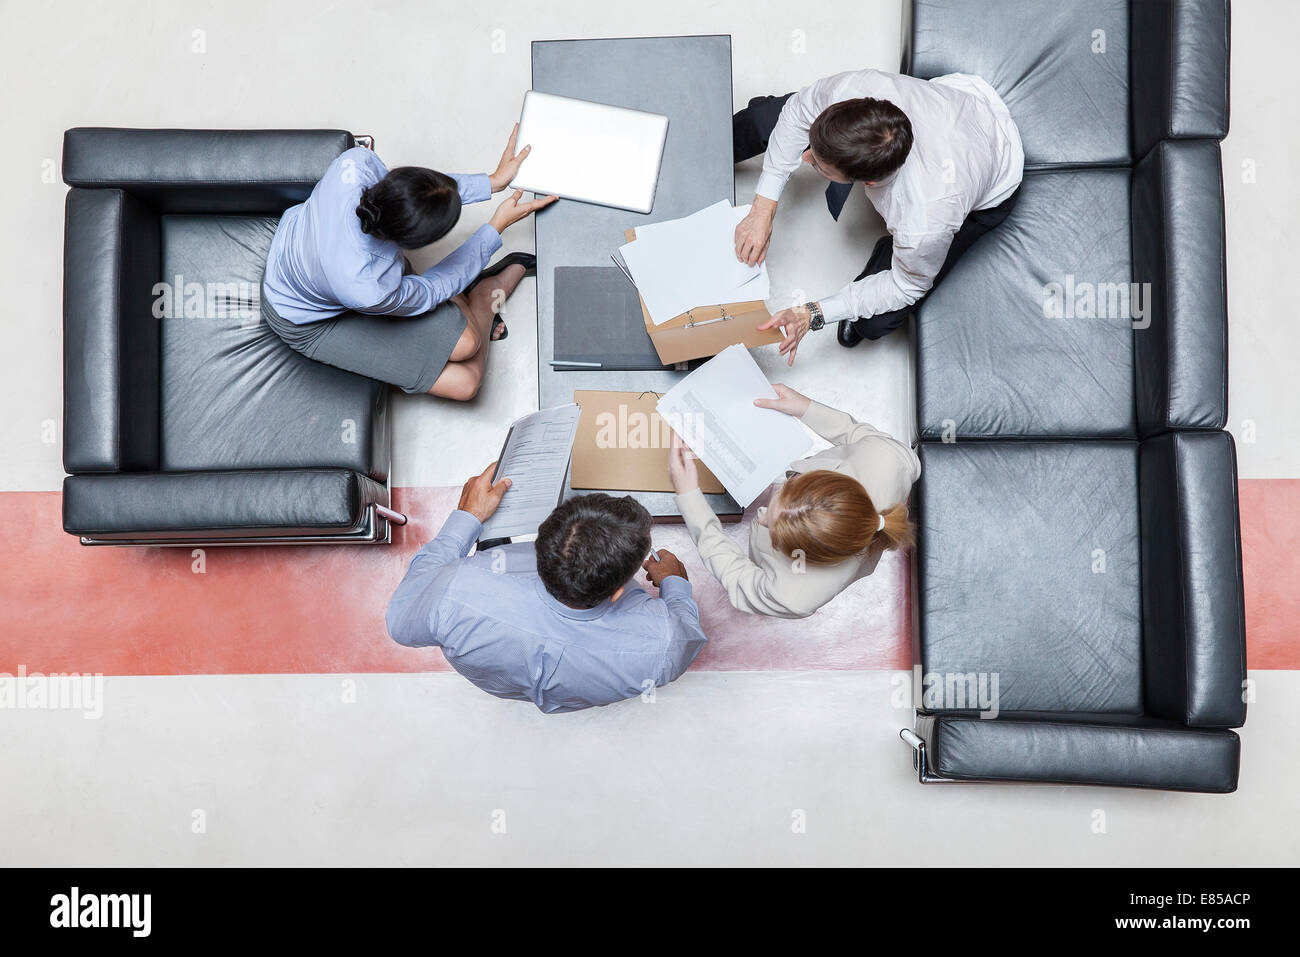 Executives in meeting, overhead view Stock Photo